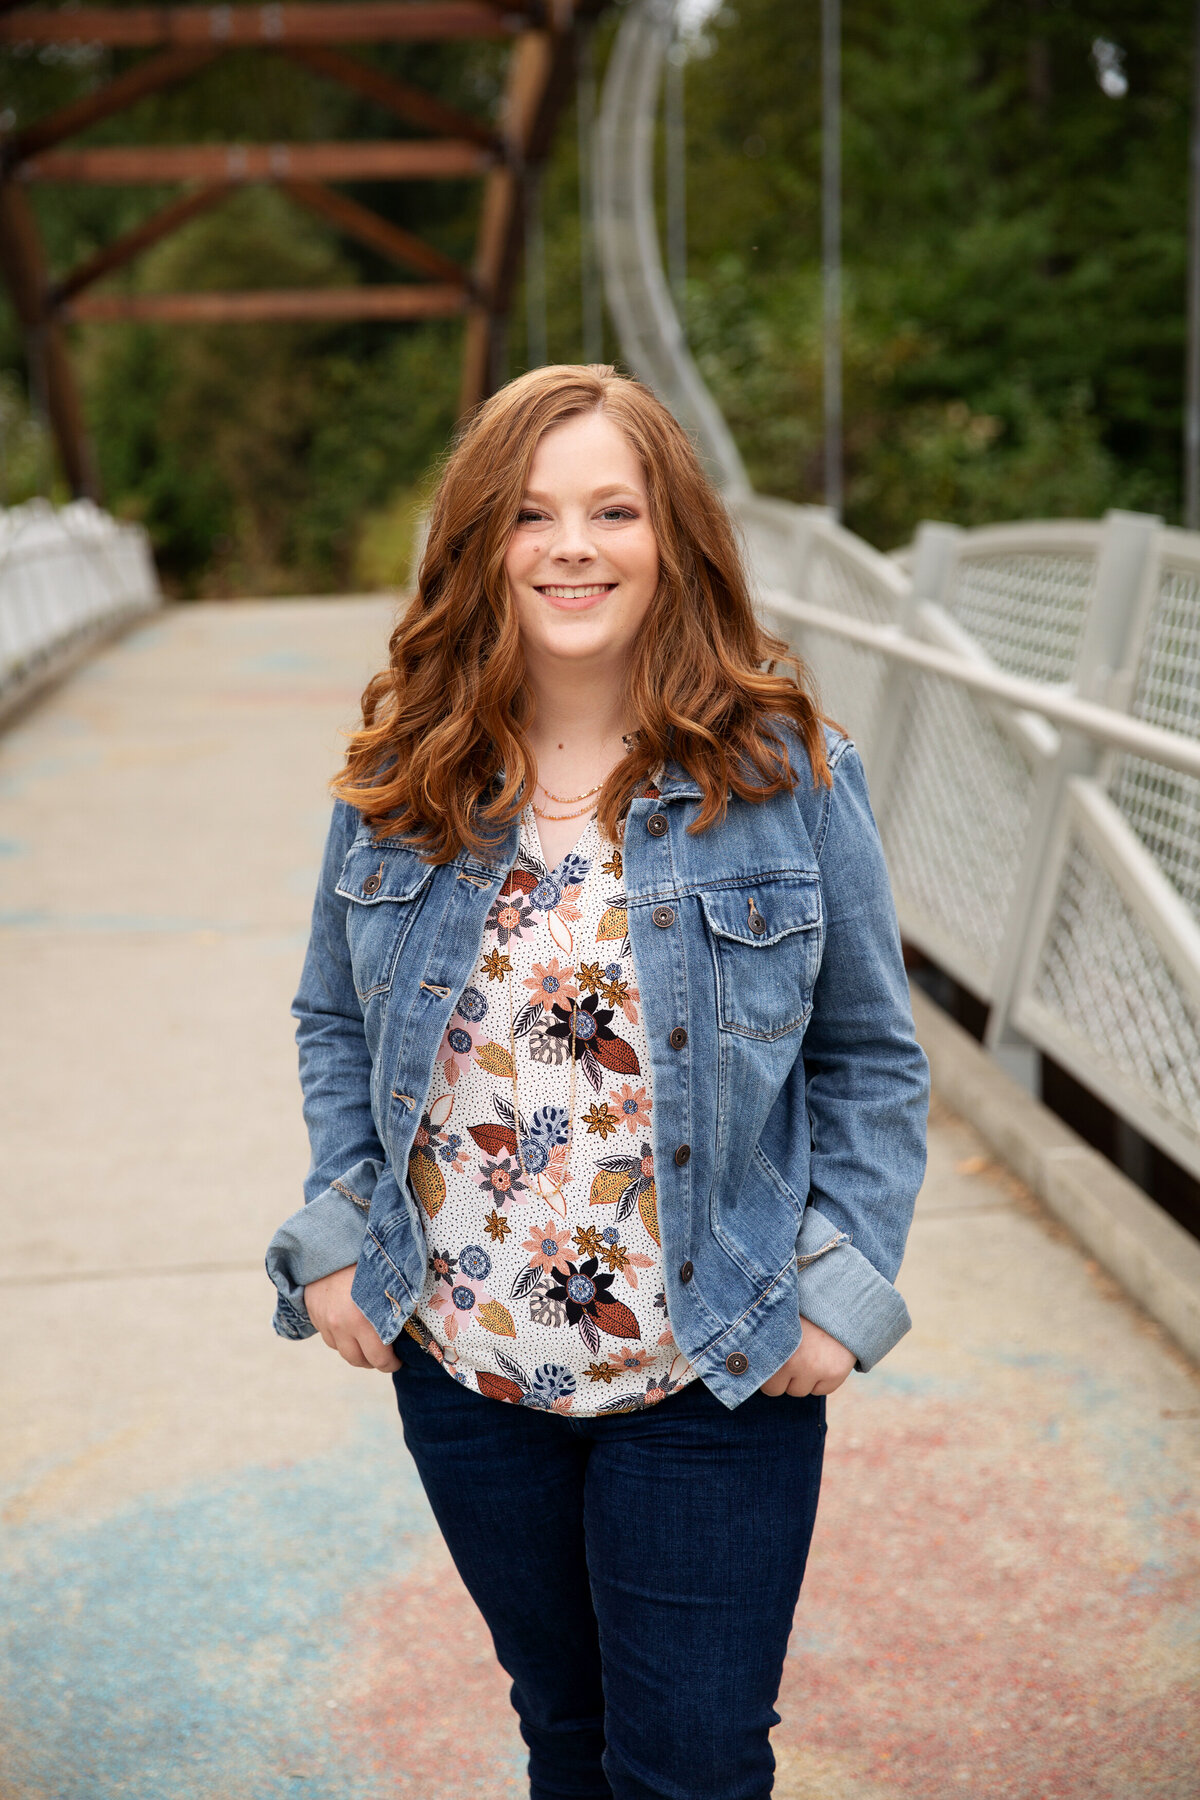 issaquah-bellevue-seattle-senior-girls-teens-pictures-nancy-chabot-photography-622